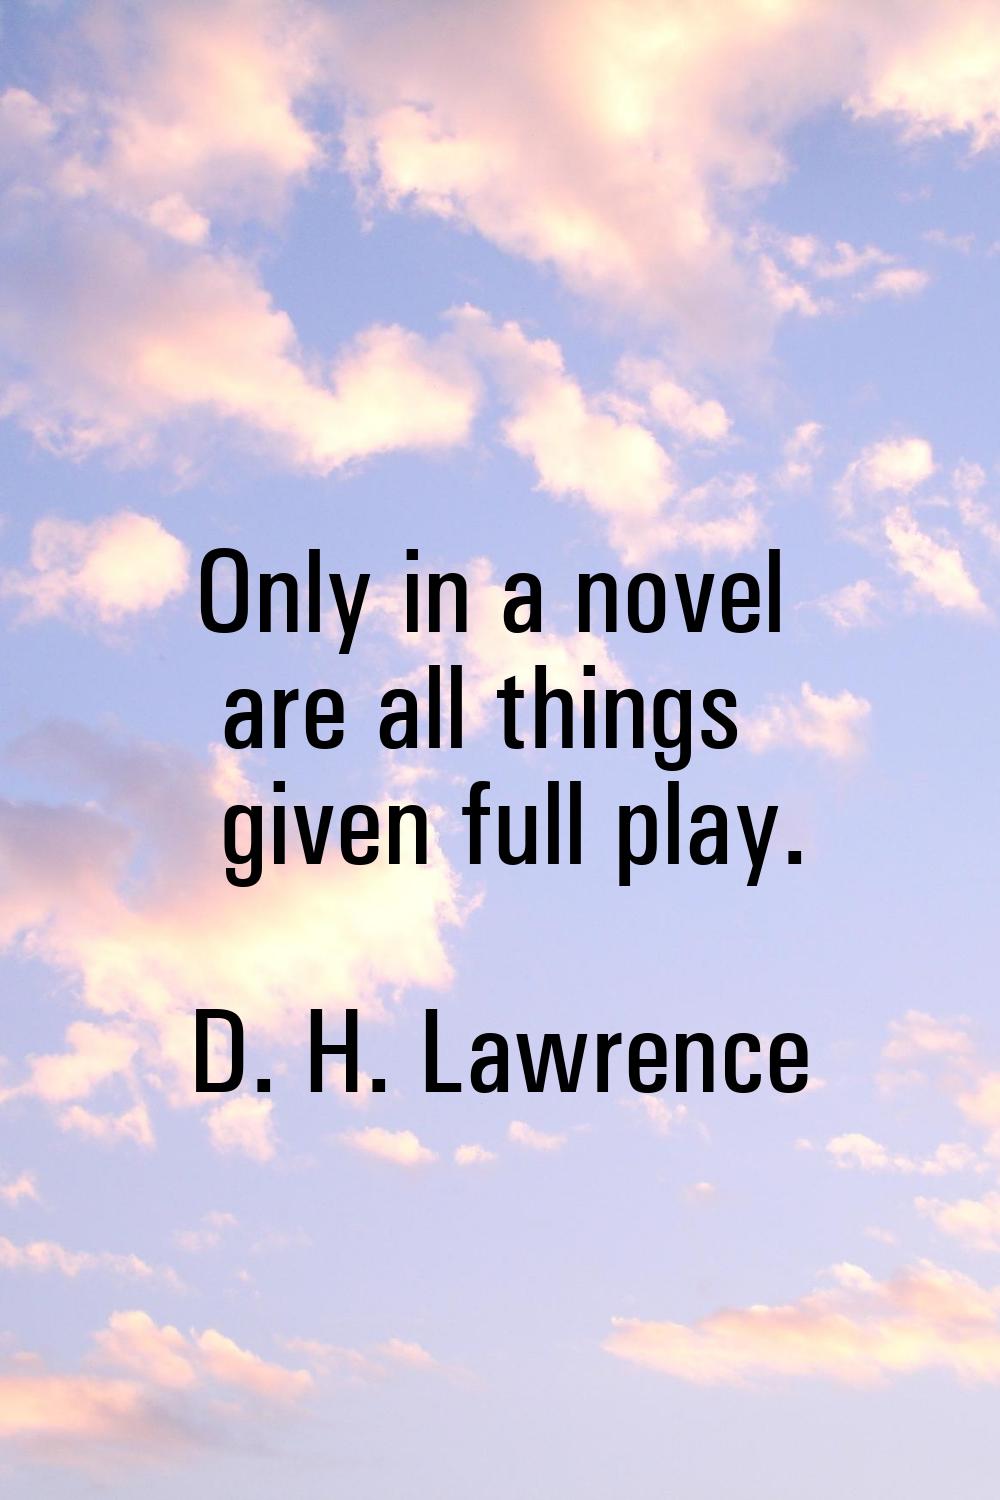 Only in a novel are all things given full play.